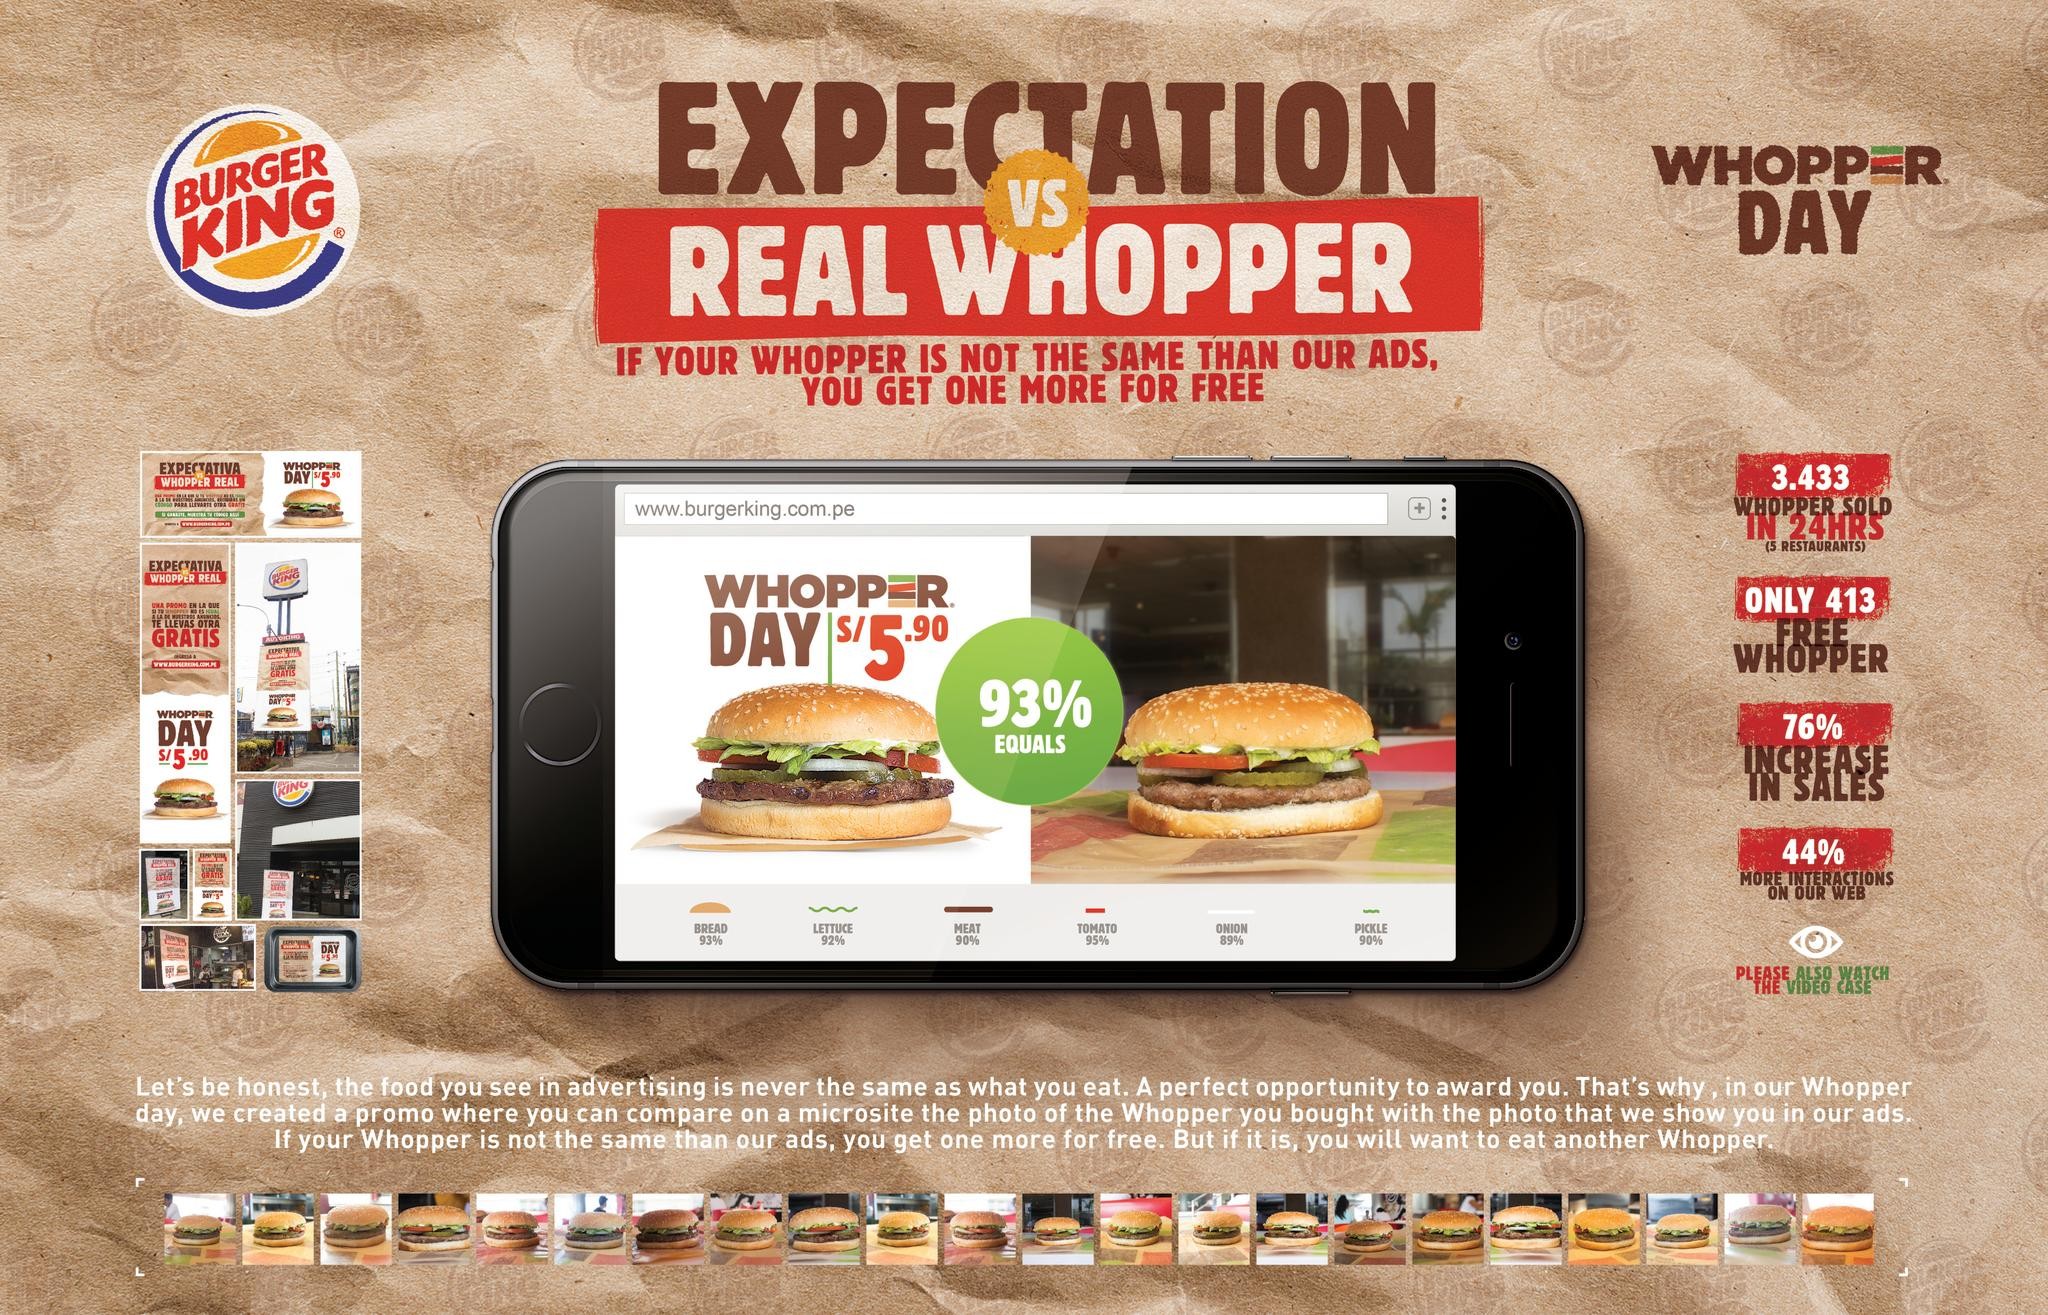 EXPECTATION VS REAL WHOPPER